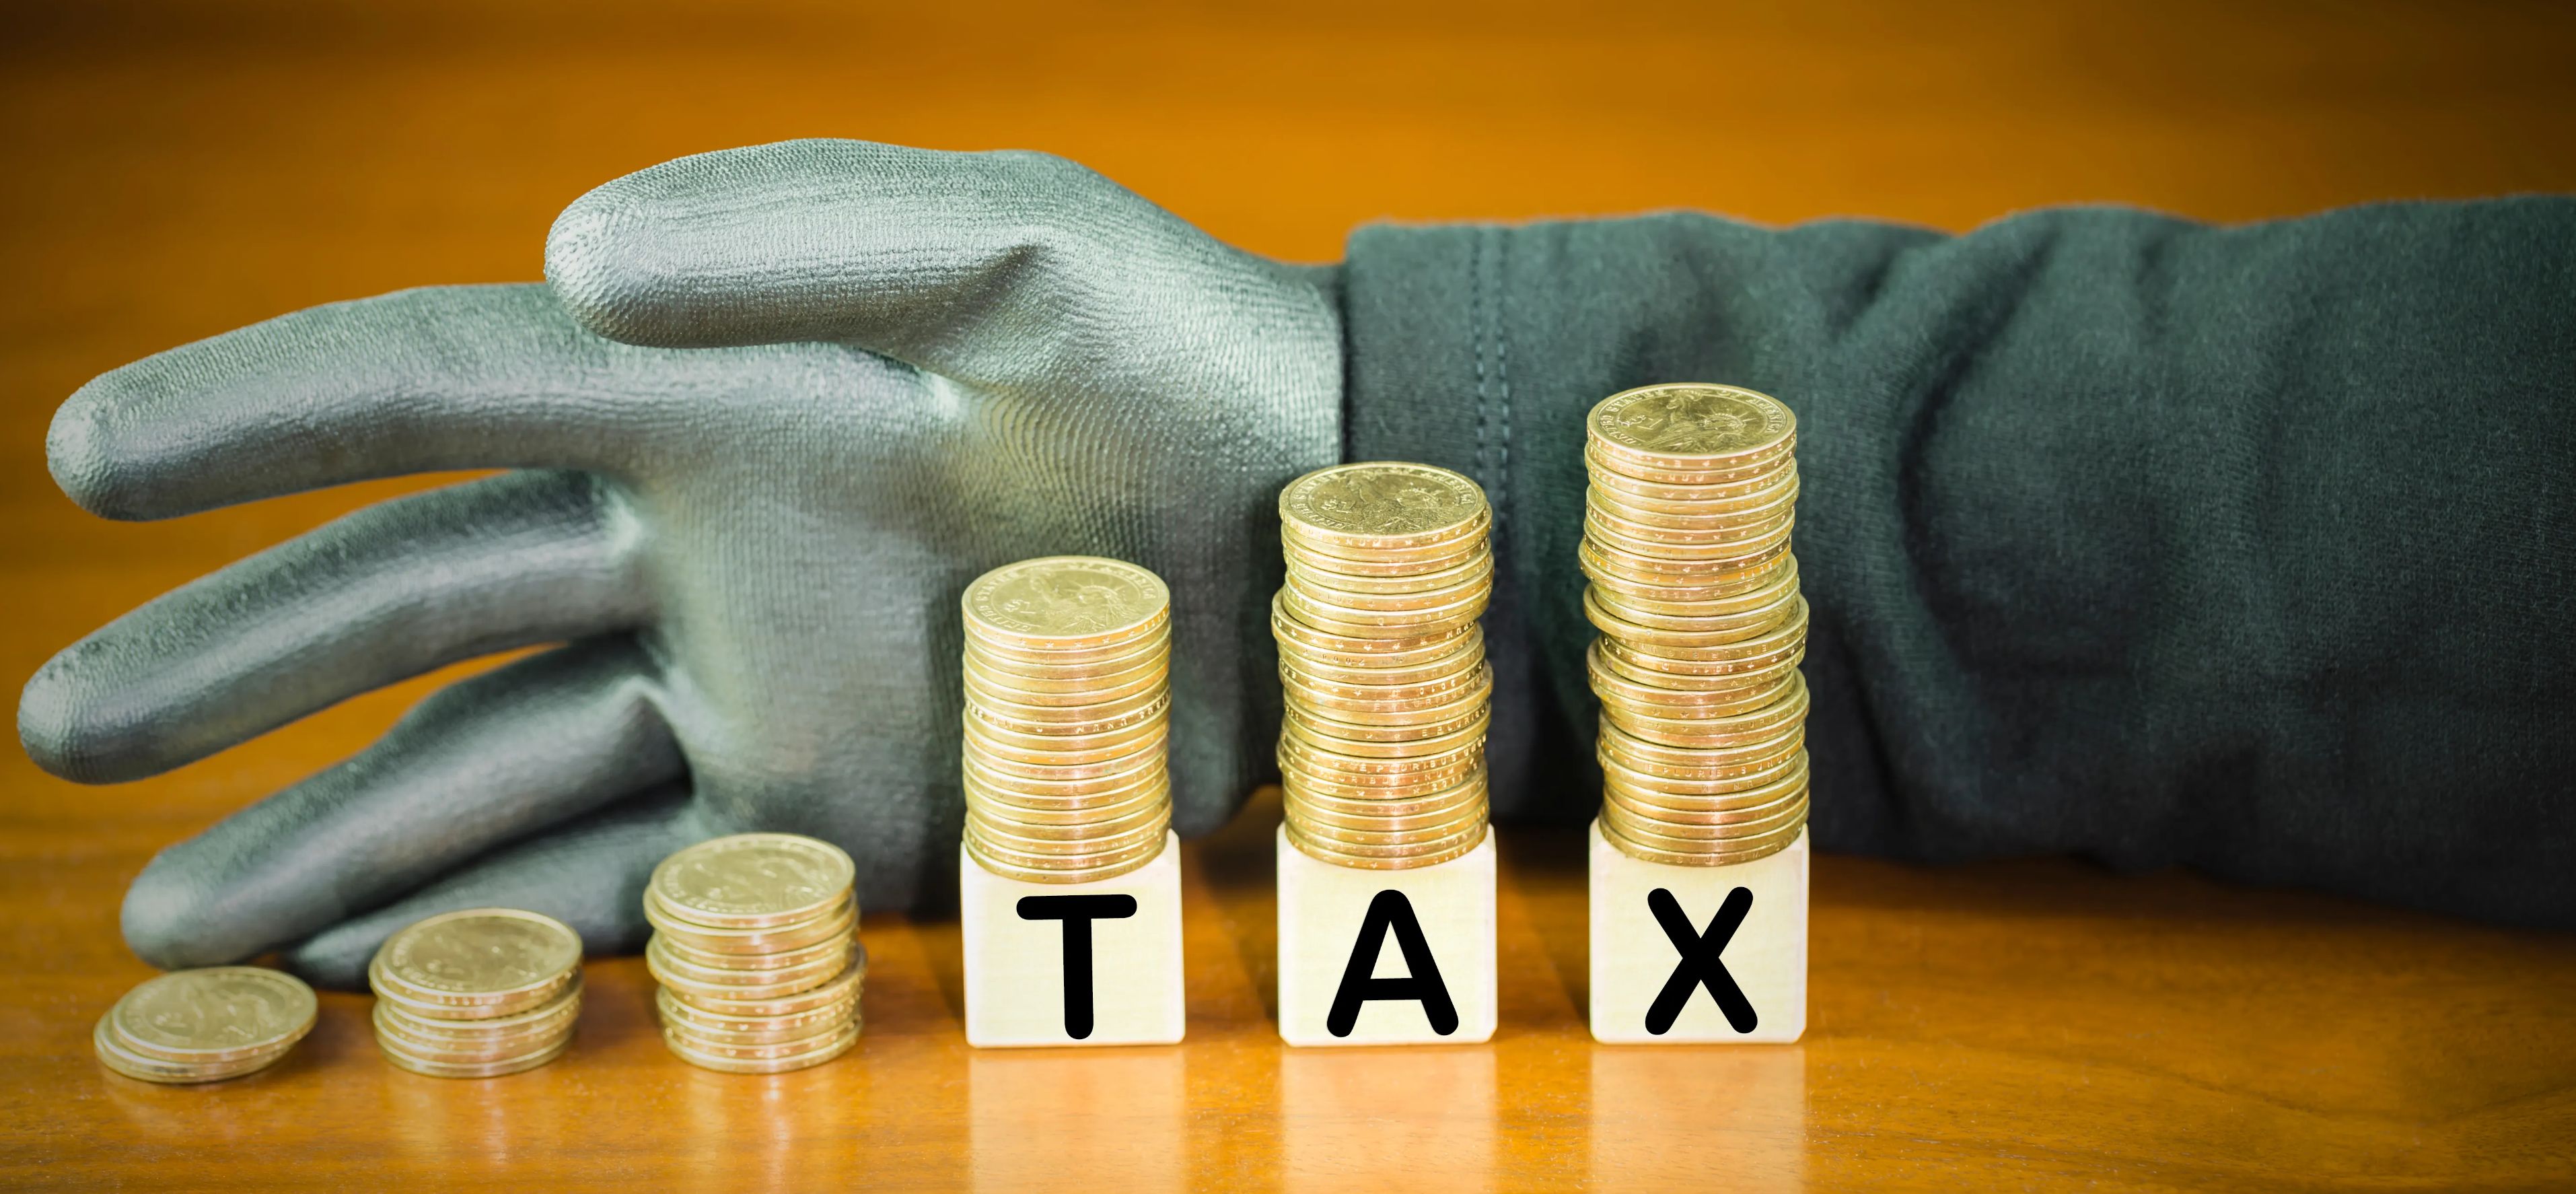 Hand behind coins with the word "tax" stock photo